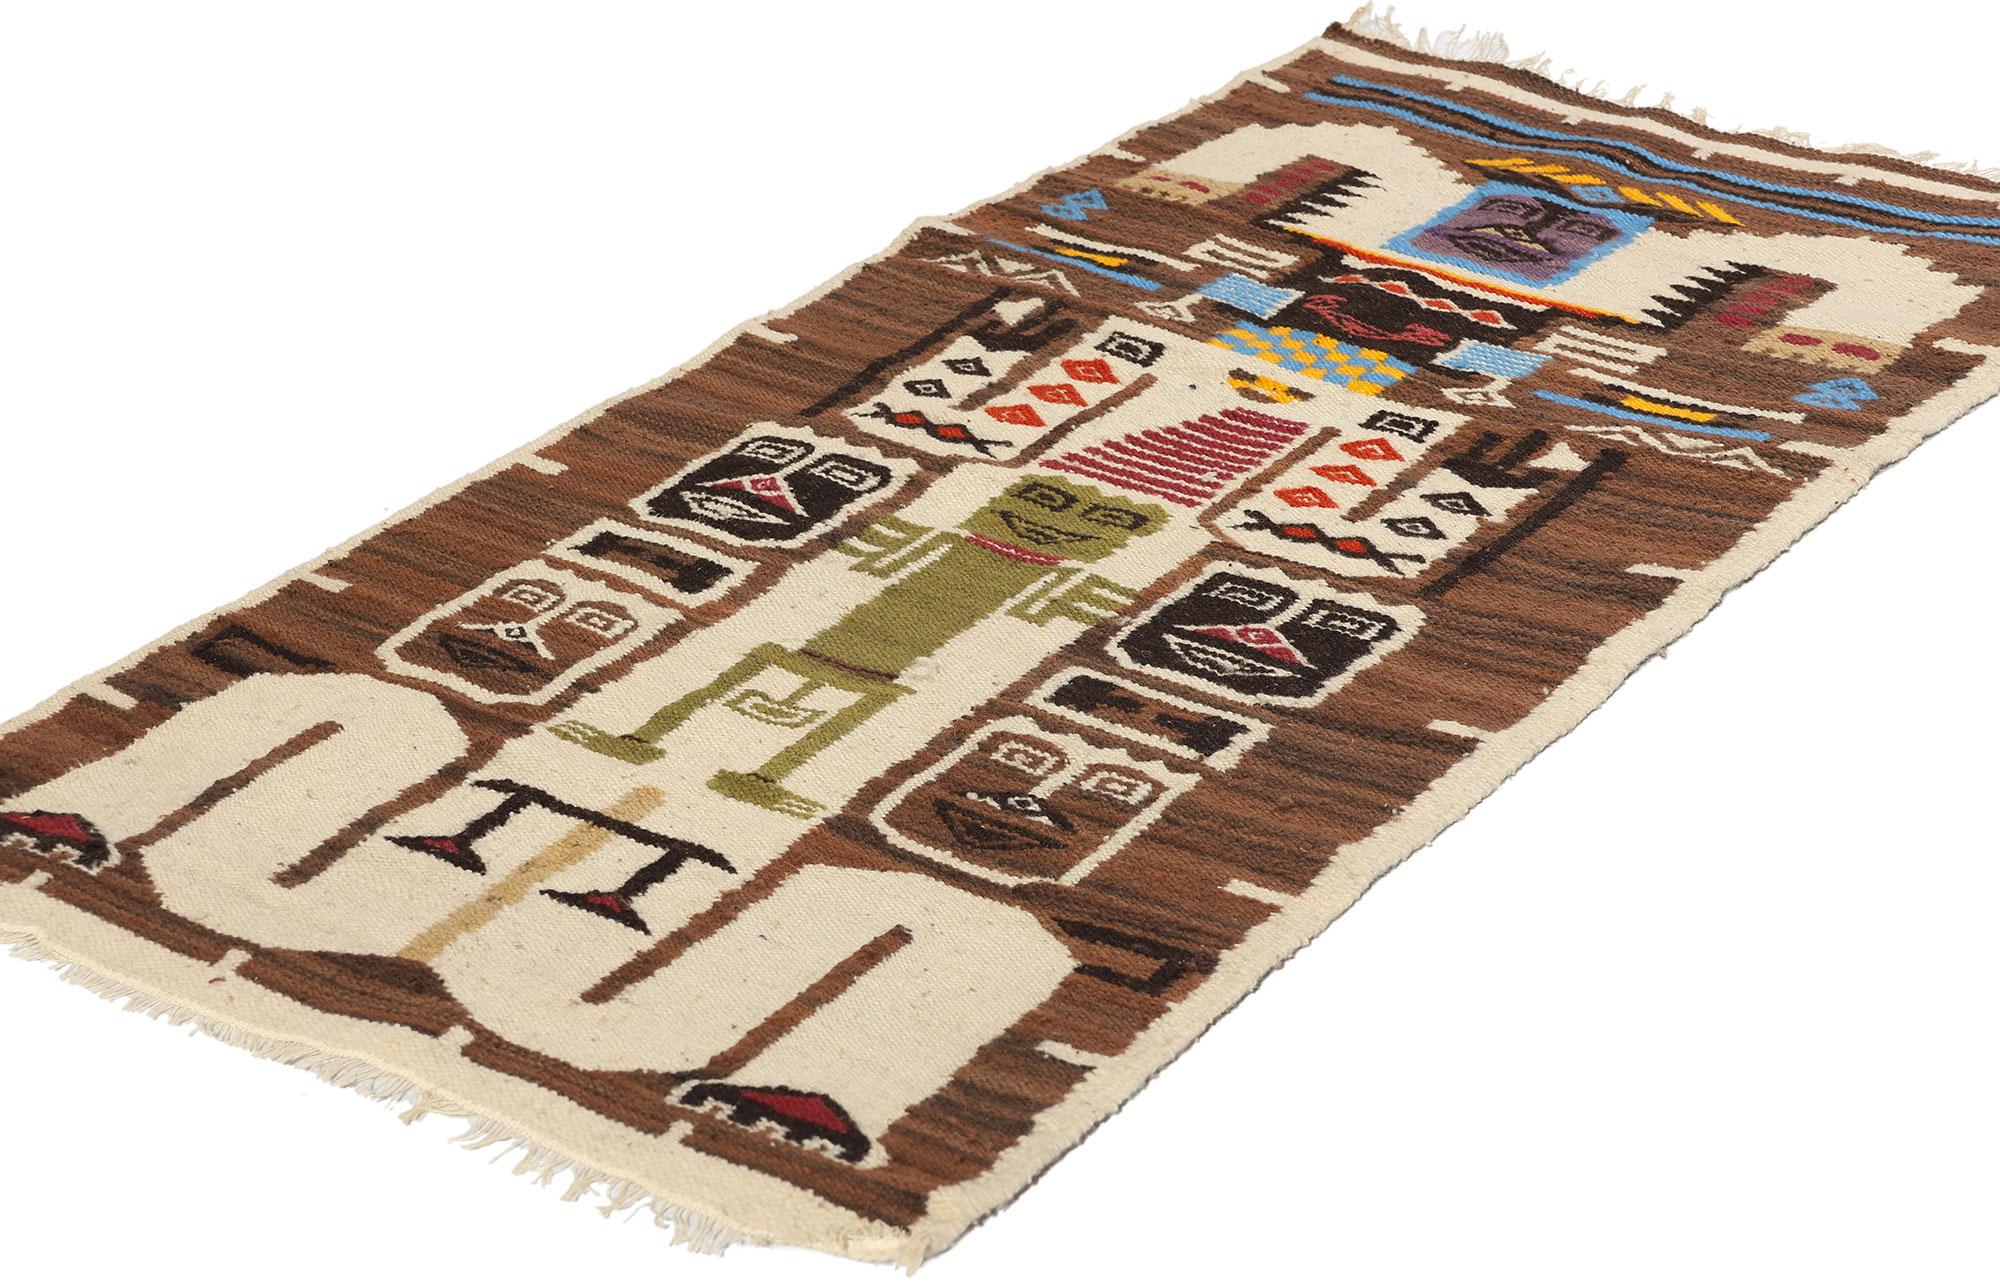 Hand-Woven Vintage Peruvian Deity Pictorial Kilim Rug For Sale